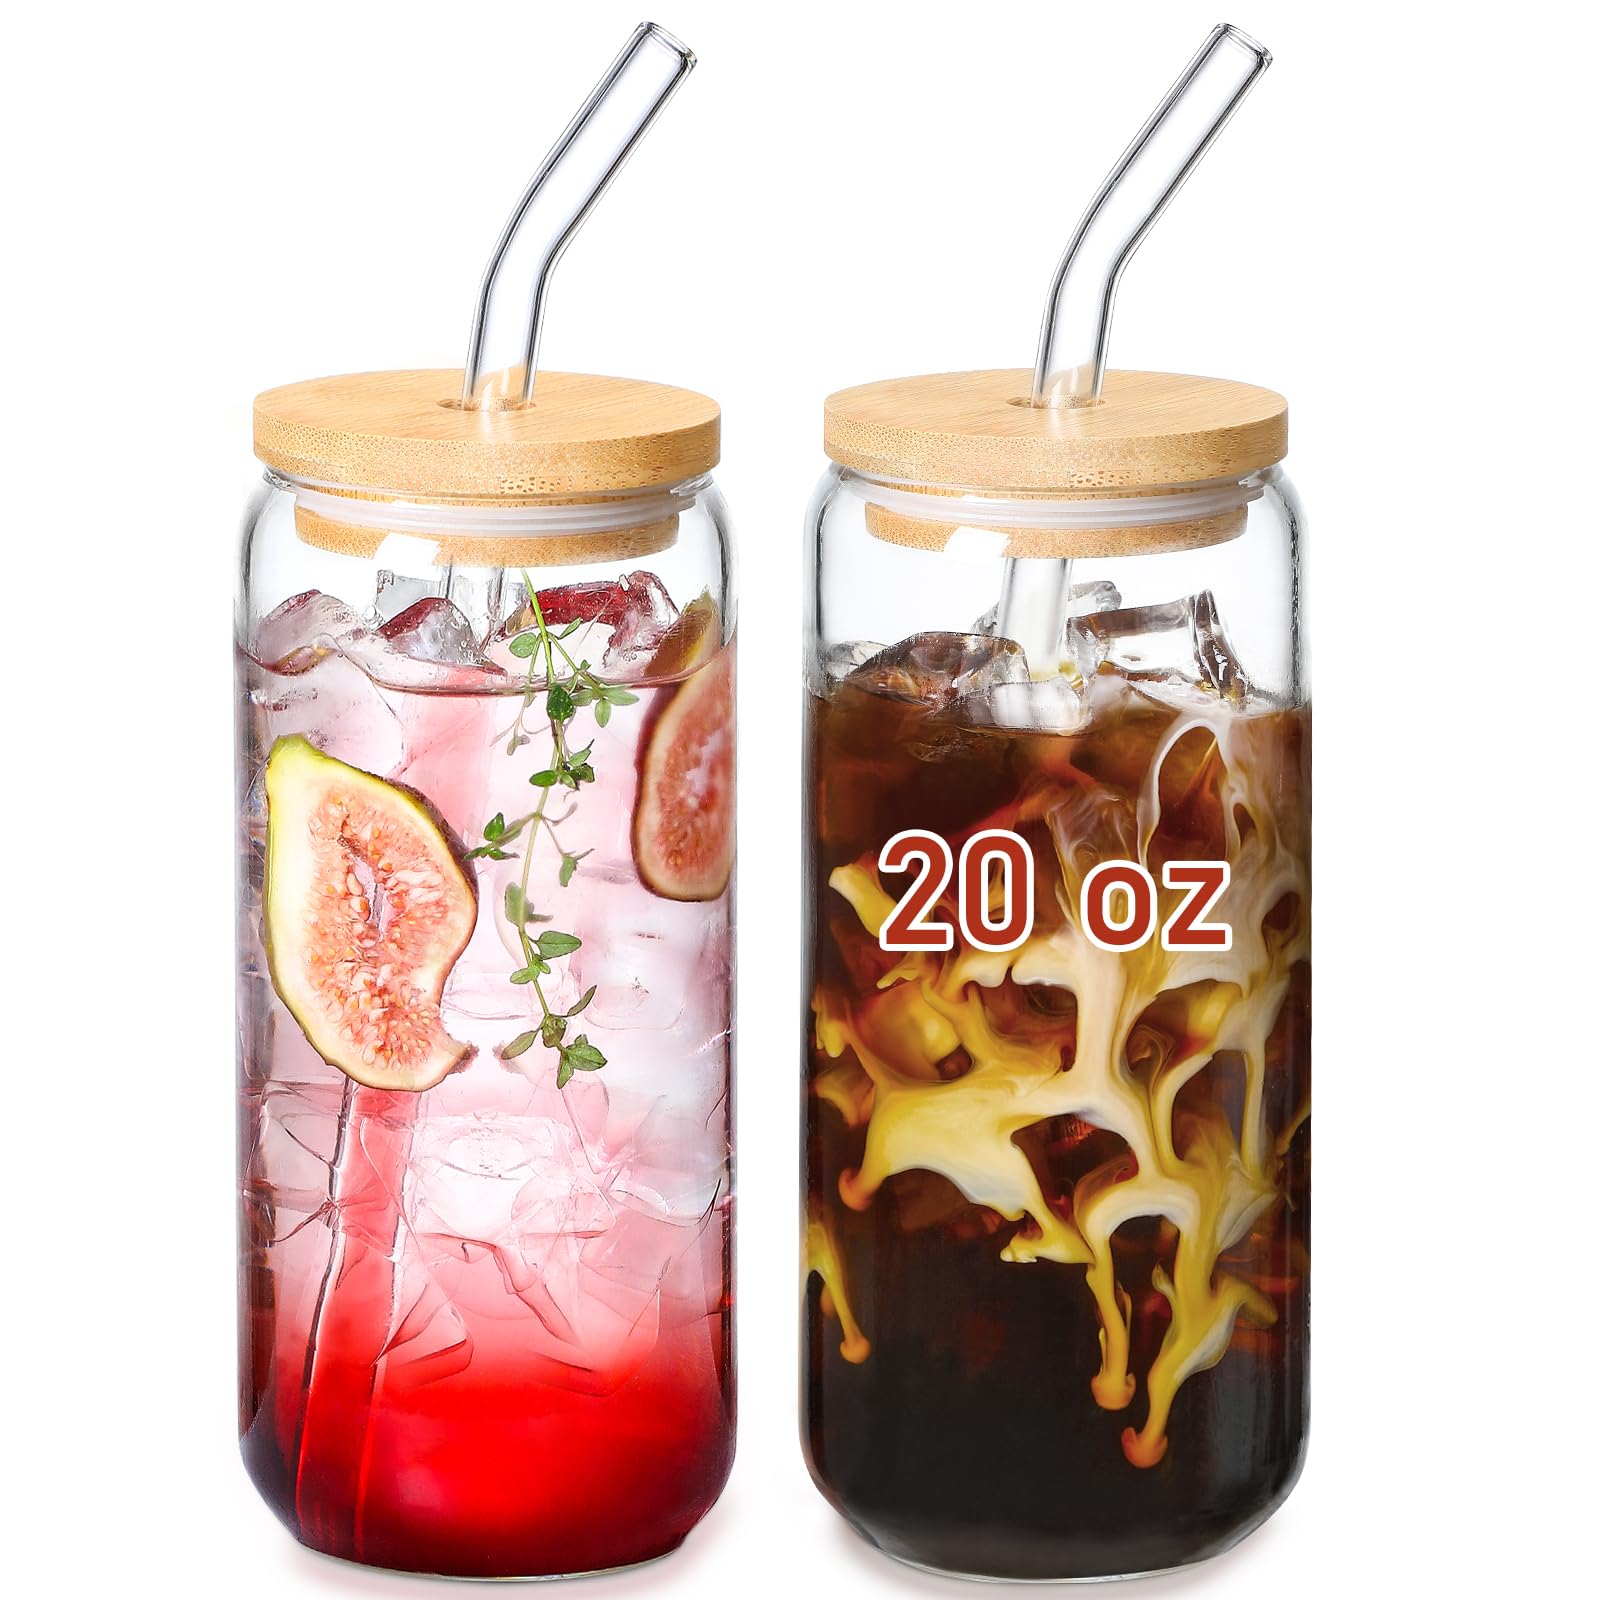 VITEVER 20 OZ Glass Cups with Bamboo Lids and Glass Straw - Beer Can Shaped Drinking Glasses Set, Iced Coffee Glasses, Cute Tumbler Cup, Aesthetic Coffee Bar Accessories, Gift - 2 Pack